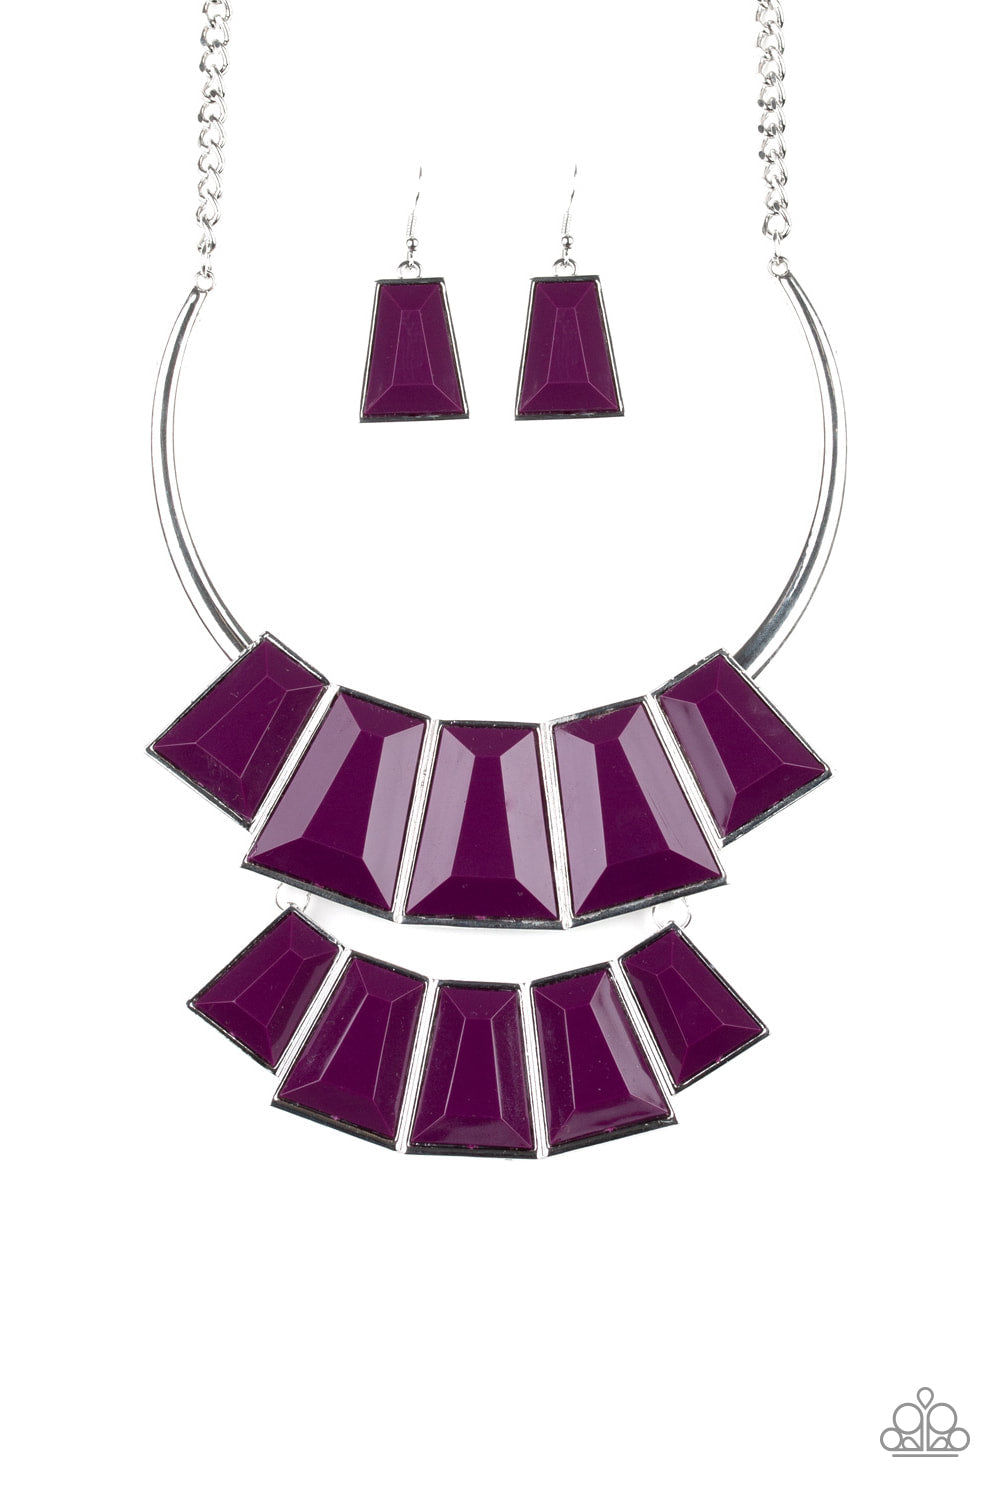 Lions, TIGRESS, and Bears - Purple - Necklace - Paparazzi Accessories